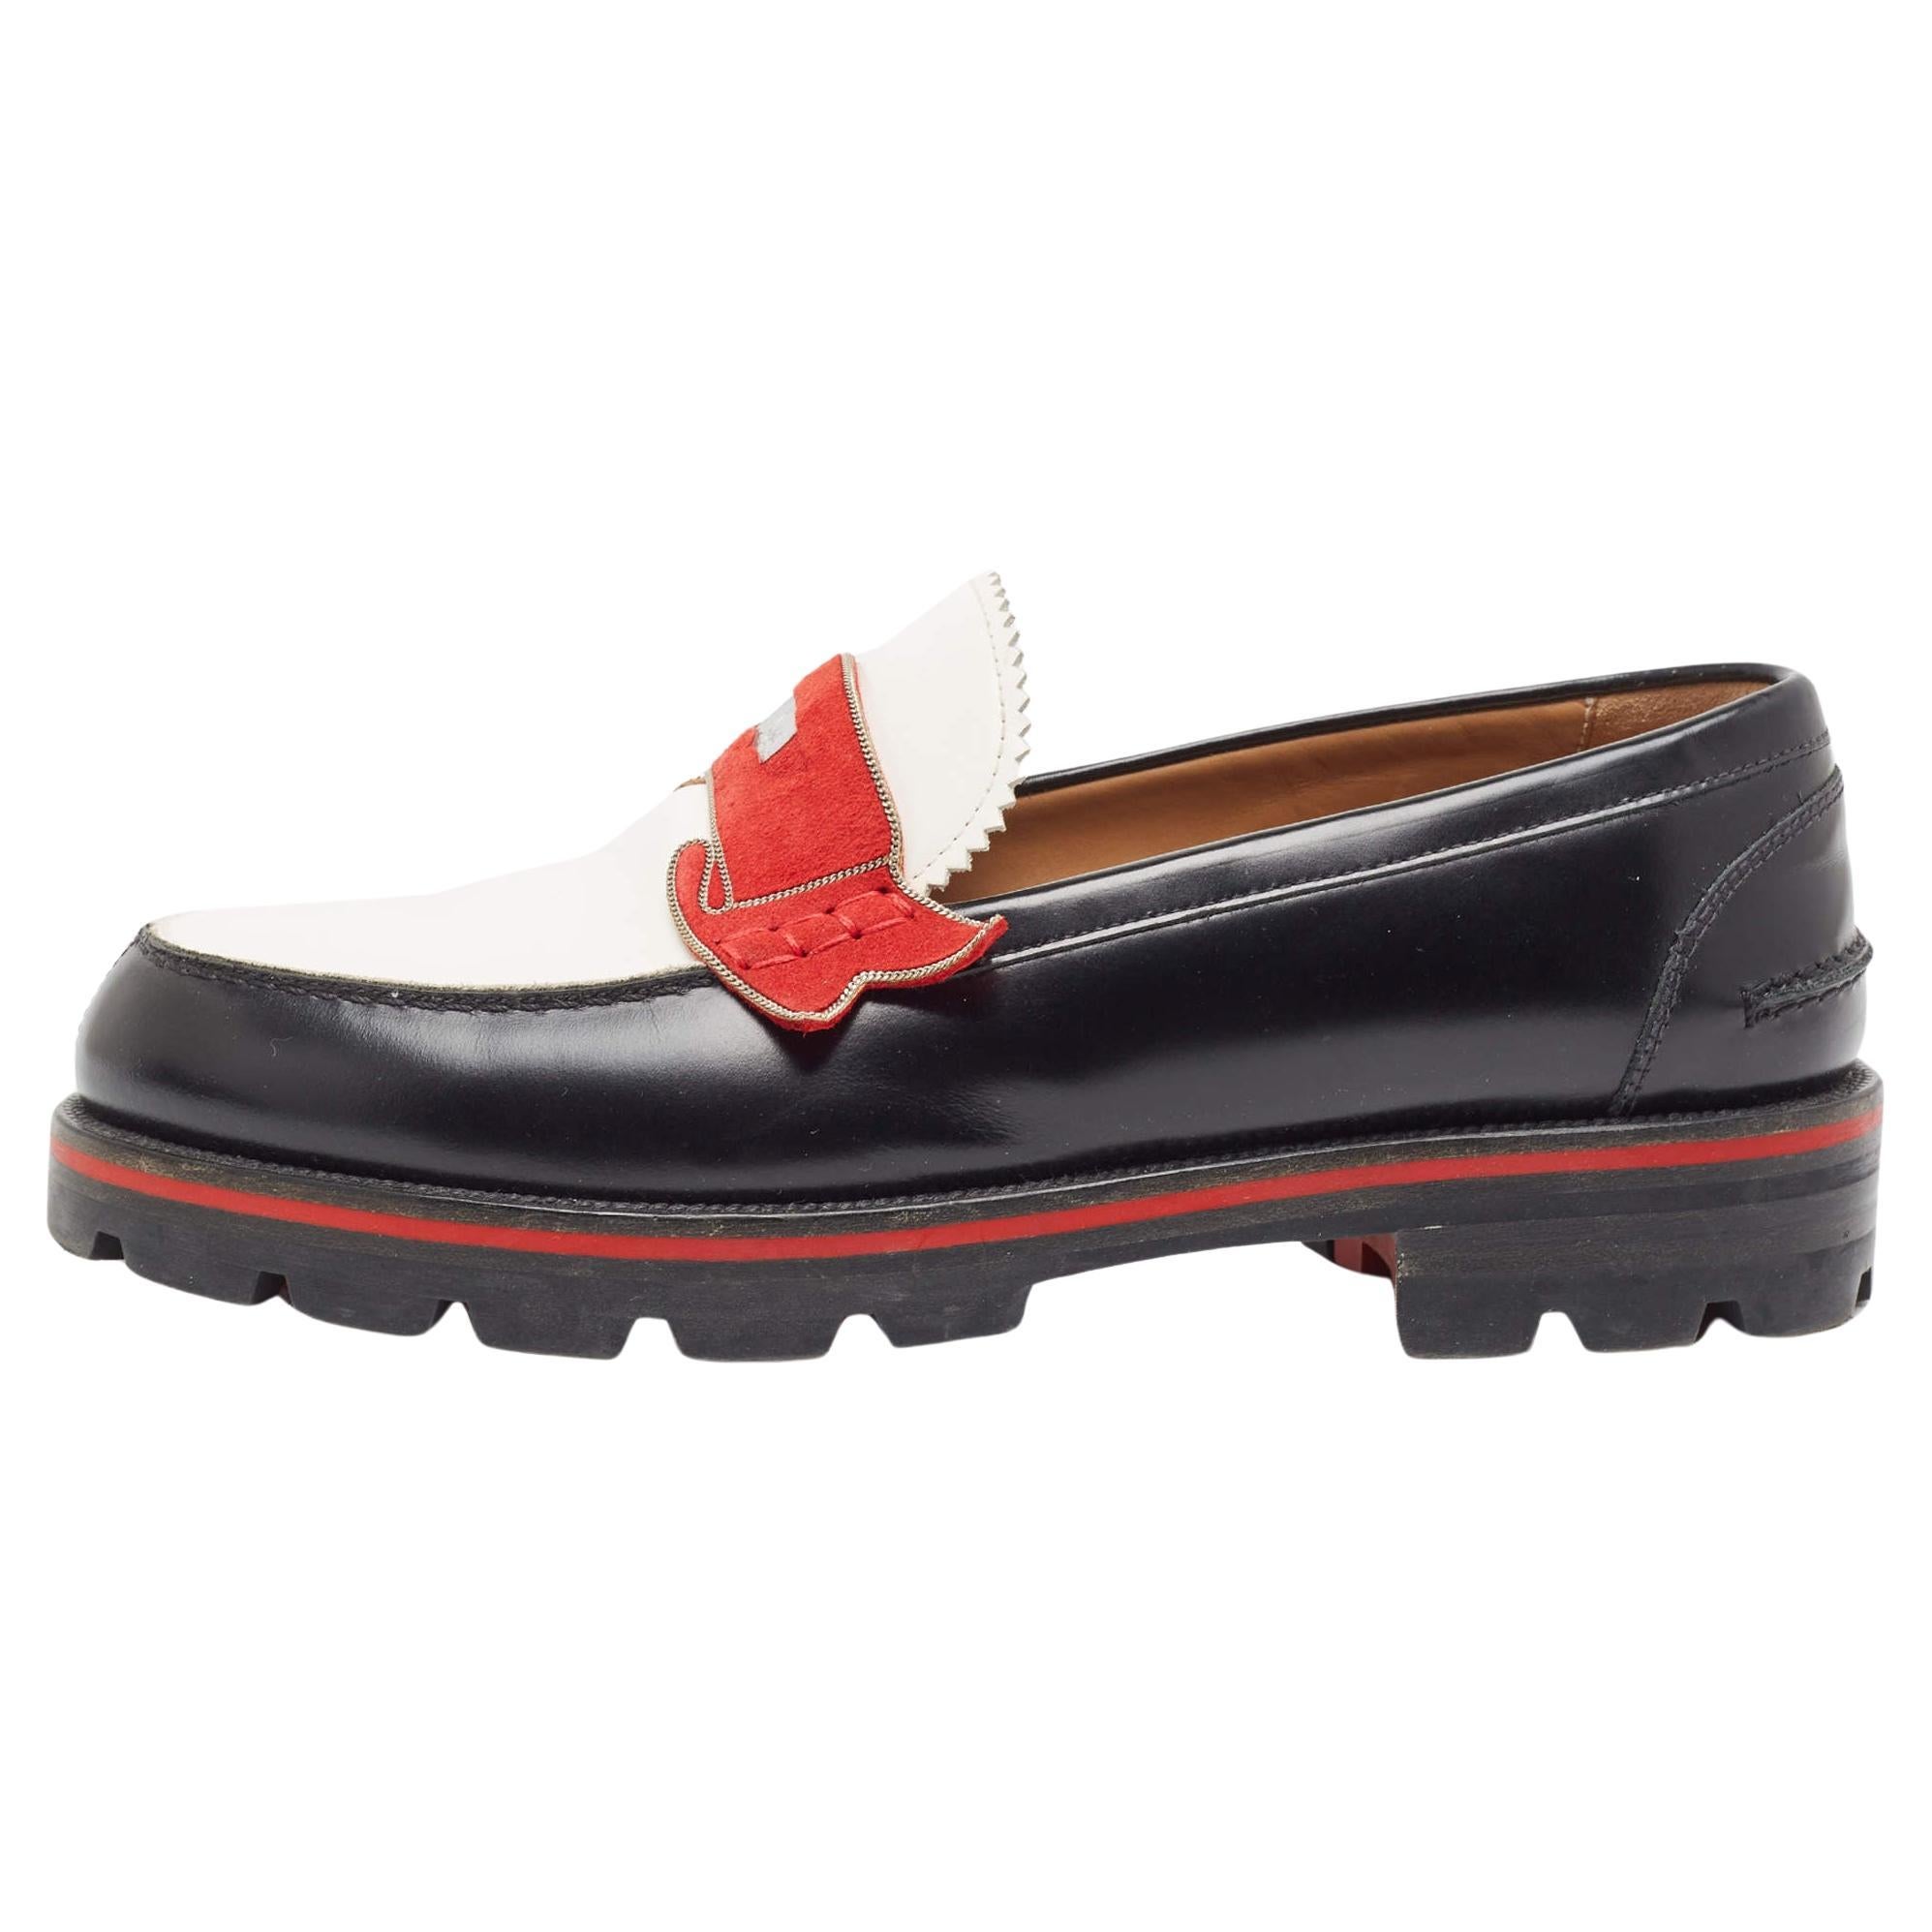 Christian Louboutin Tricolor Leather Monono Loafers Size 40 For Sale